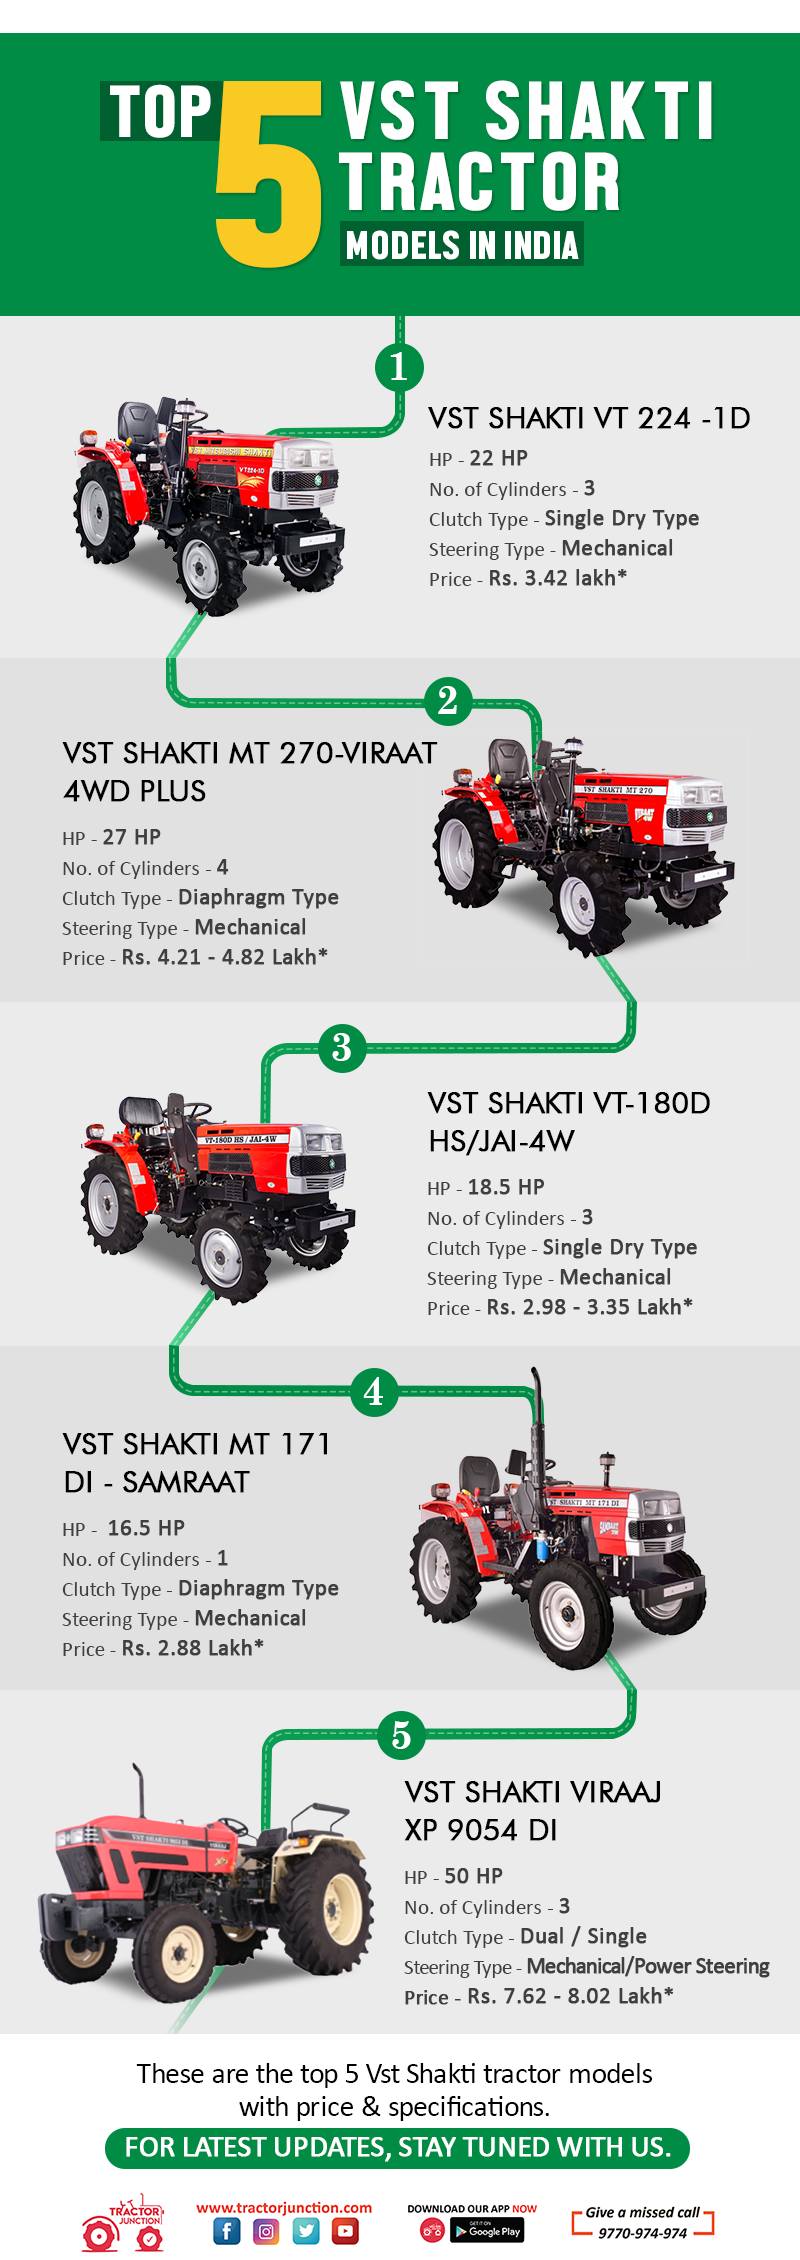 Top 5 Vst Shakti Tractor Models in India - Infographic 